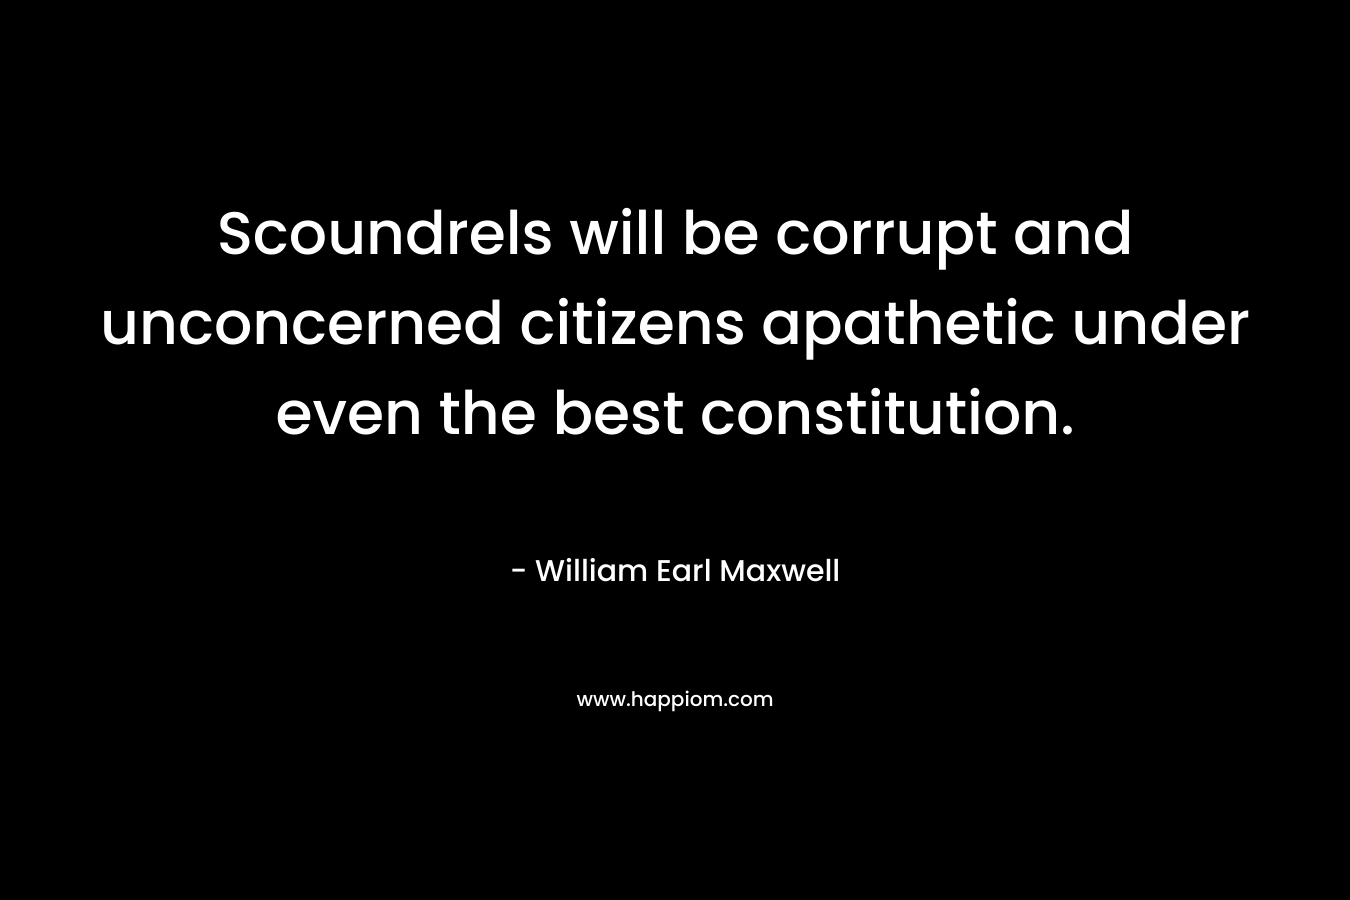 Scoundrels will be corrupt and unconcerned citizens apathetic under even the best constitution.